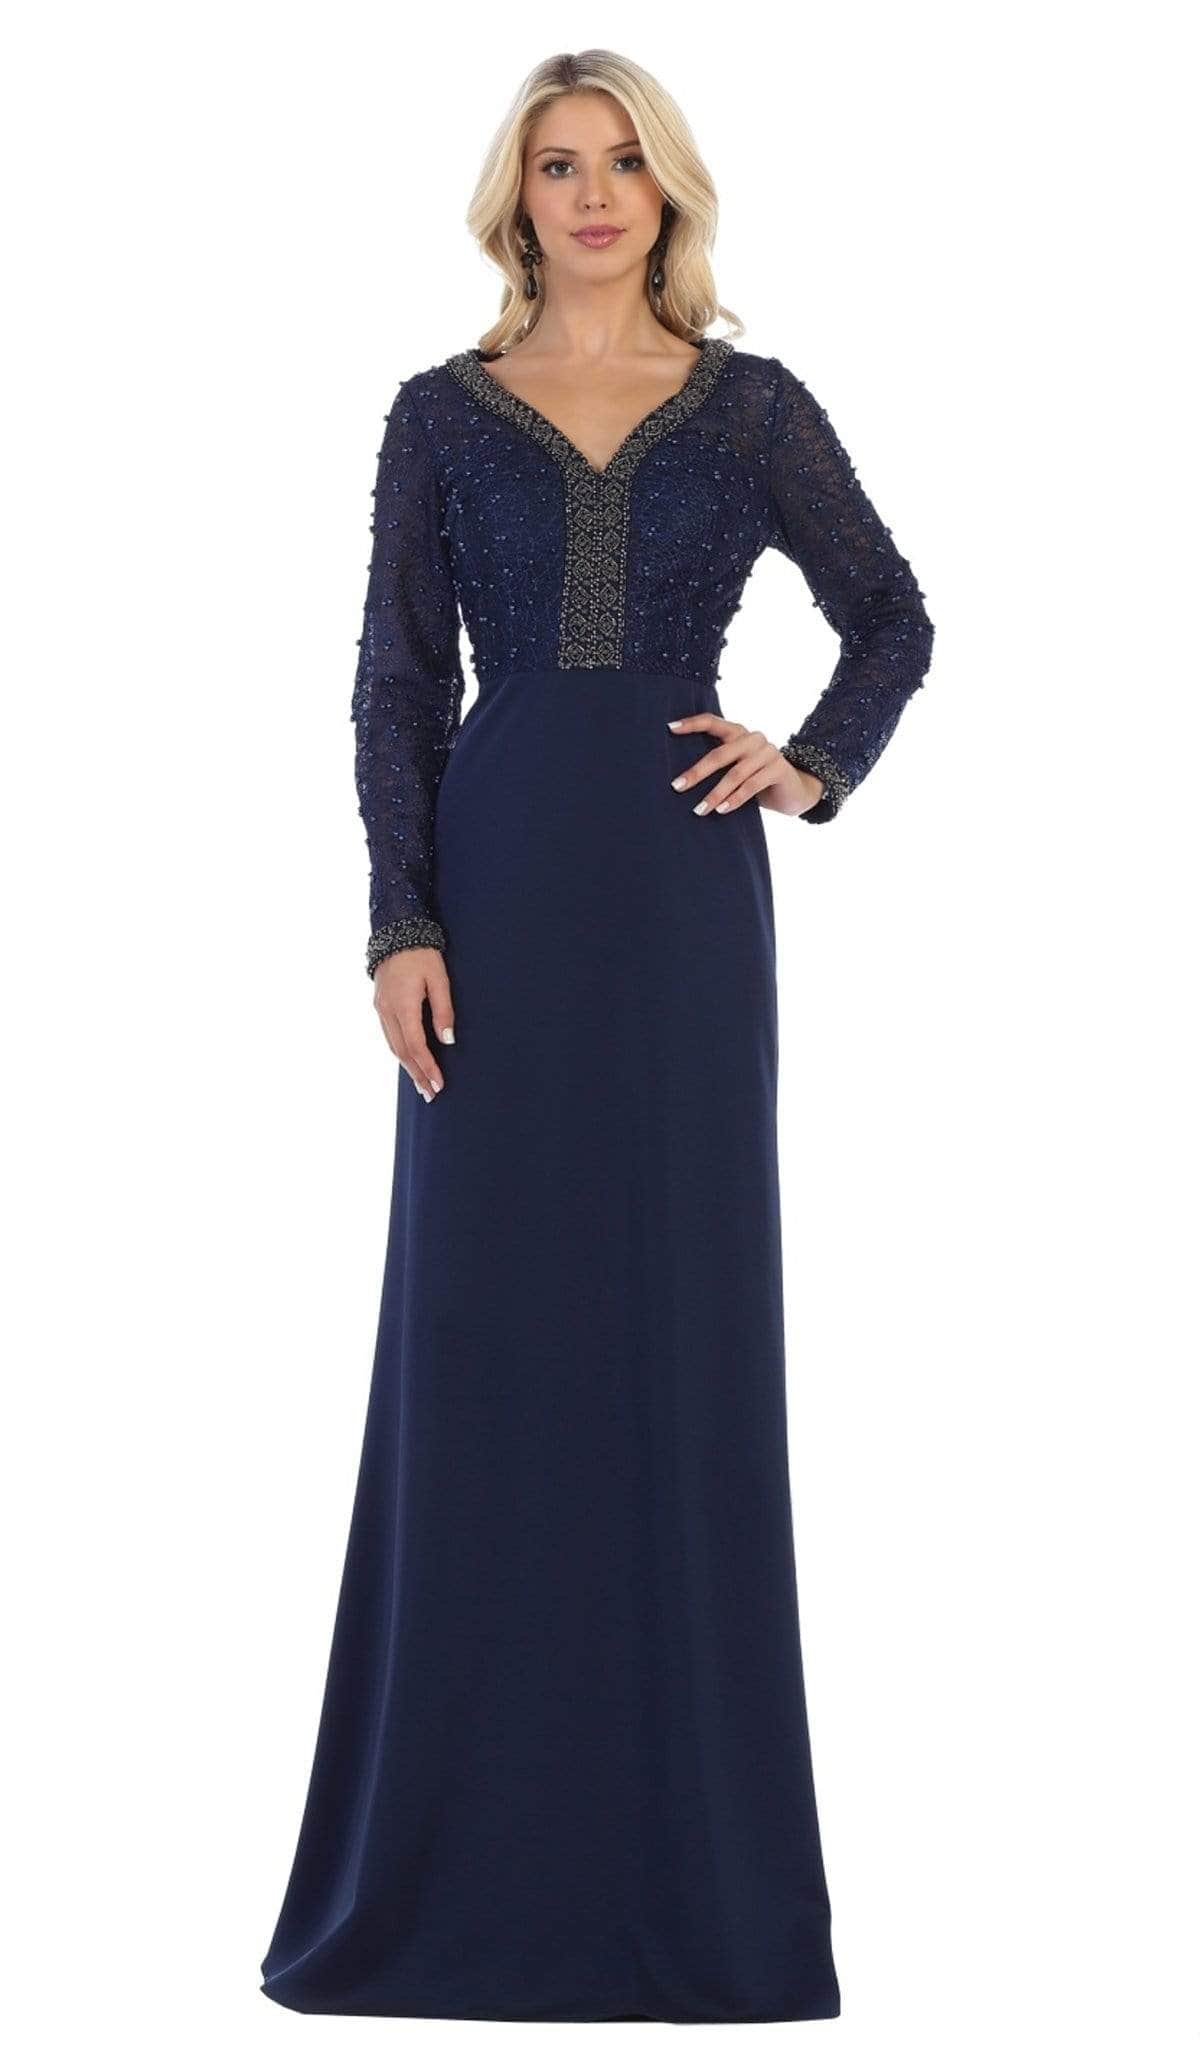 May Queen RQ7692 - Beaded V-Neck Formal Dress Mother of the Bride Dresses 4XL /Navy